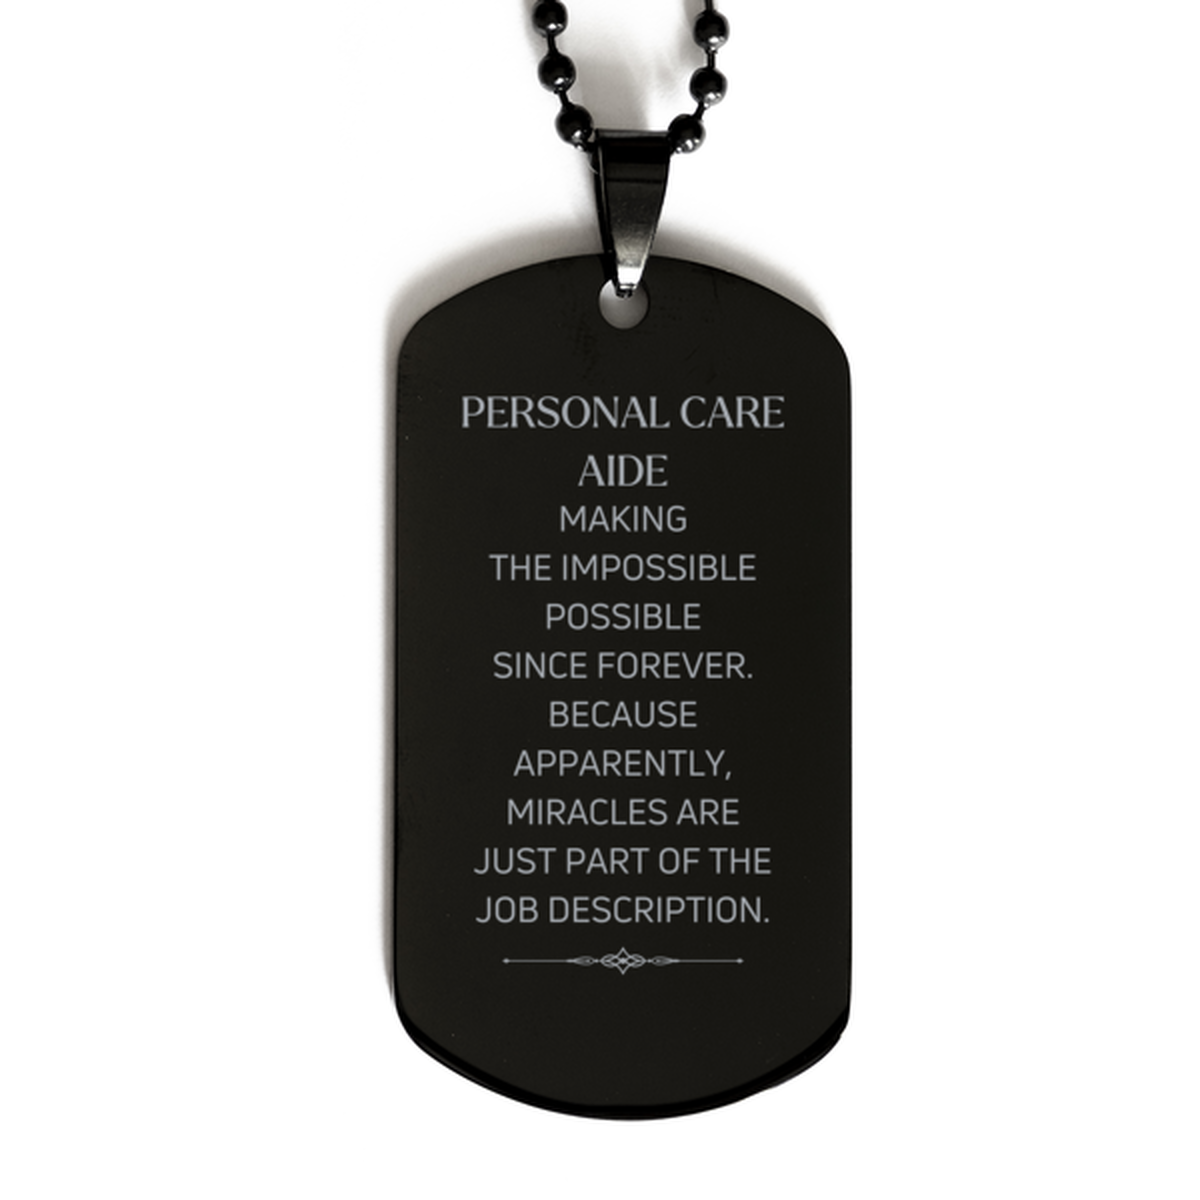 Funny Personal Care Aide Gifts, Miracles are just part of the job description, Inspirational Birthday Black Dog Tag For Personal Care Aide, Men, Women, Coworkers, Friends, Boss